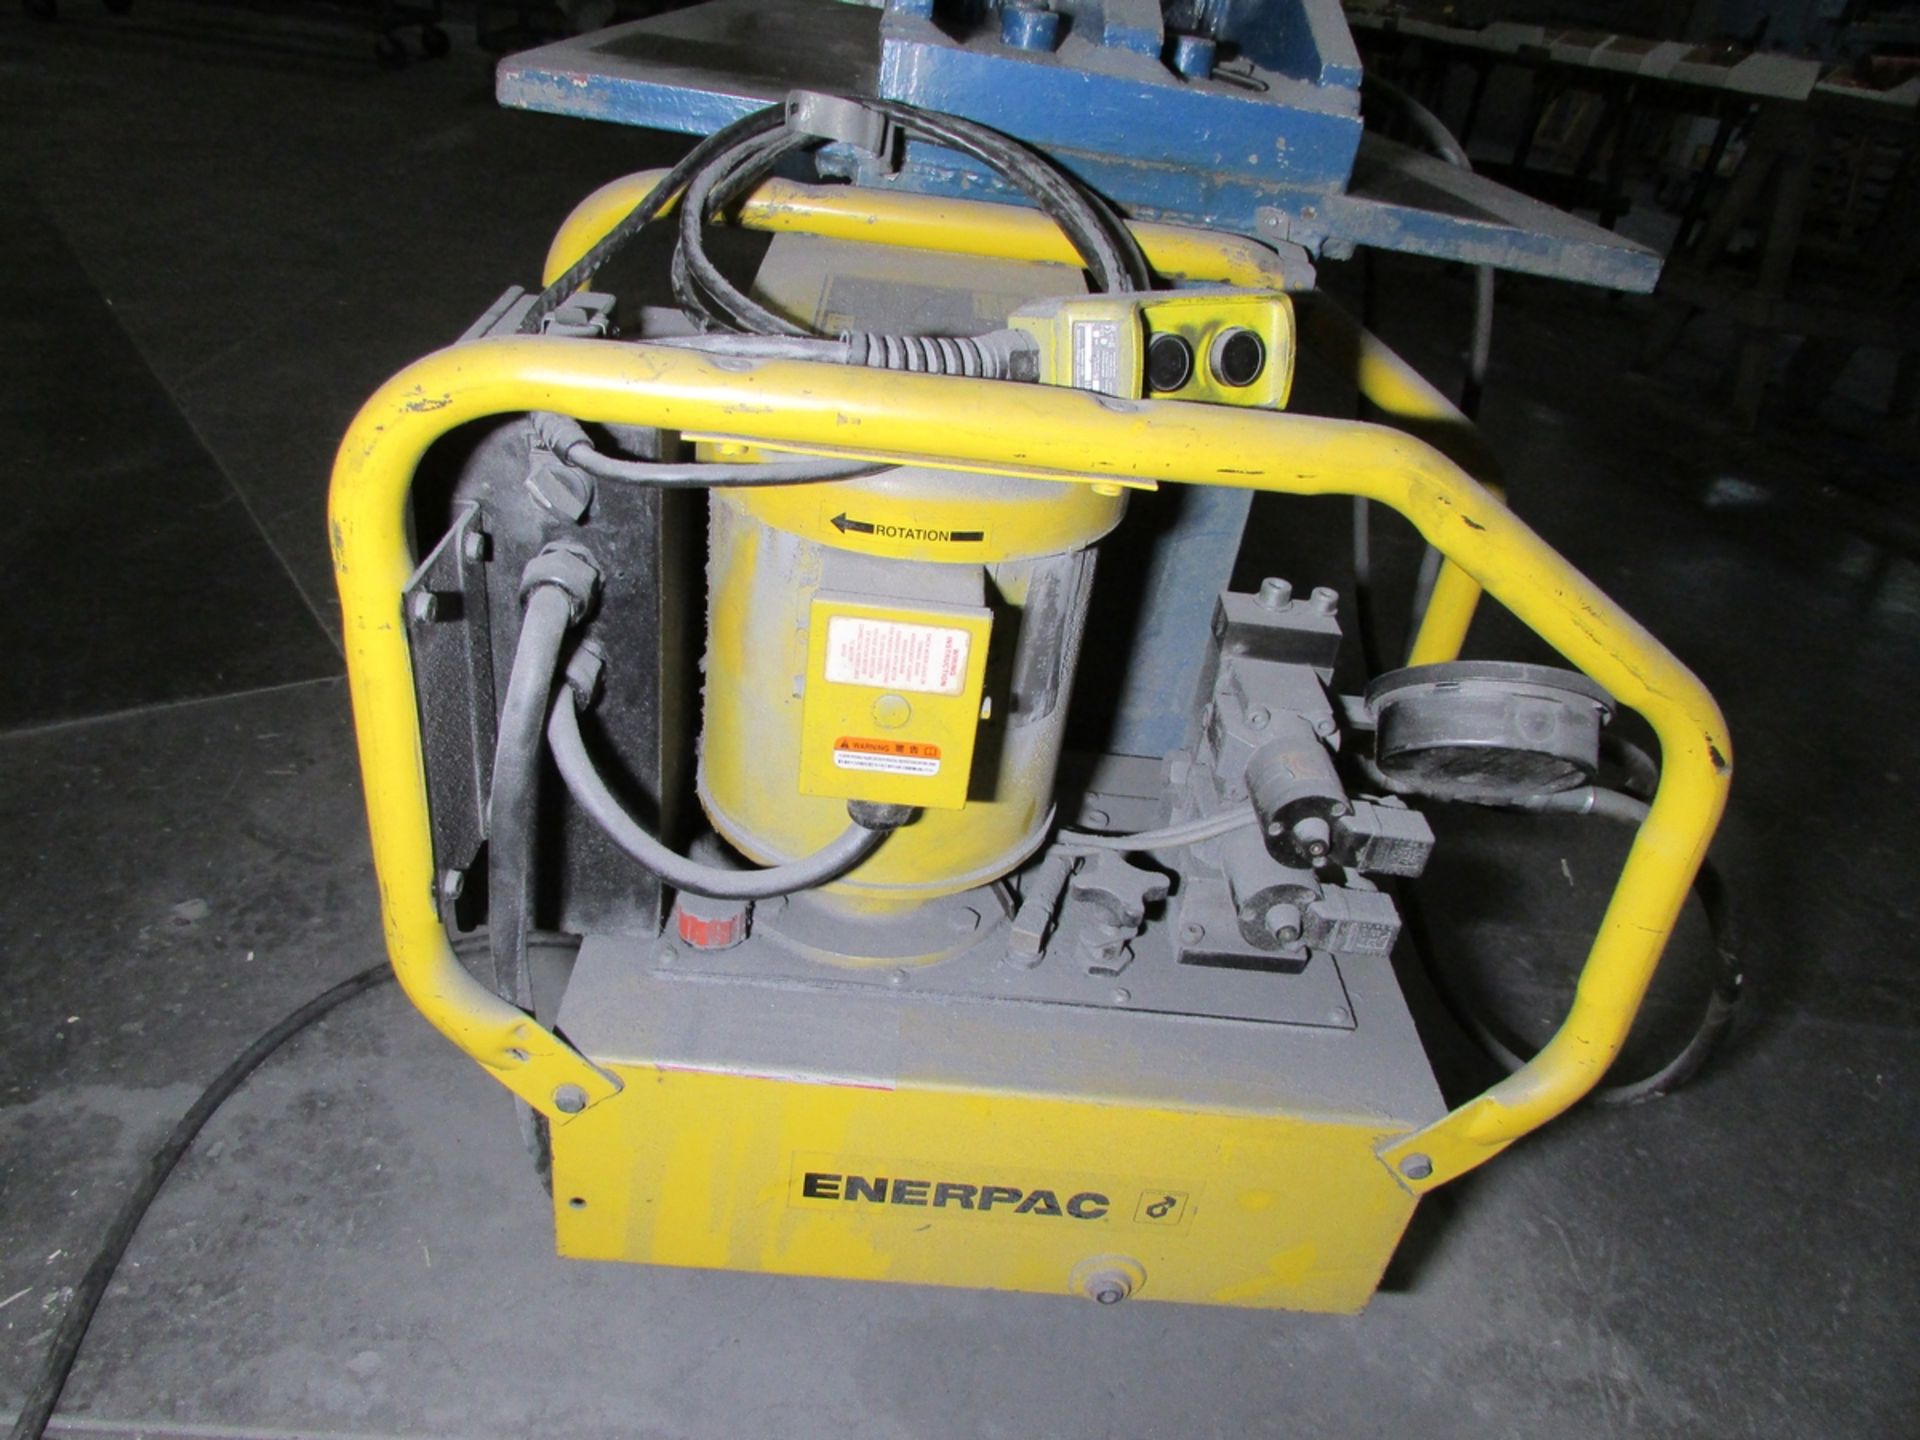 HORIZONTAL HYDRAULIC STRAIGHTENING PRESS, 30" X 9" ANGLE PLATE, 80" X 30" TABLE, ENERPAC GPER5320J - Image 6 of 12